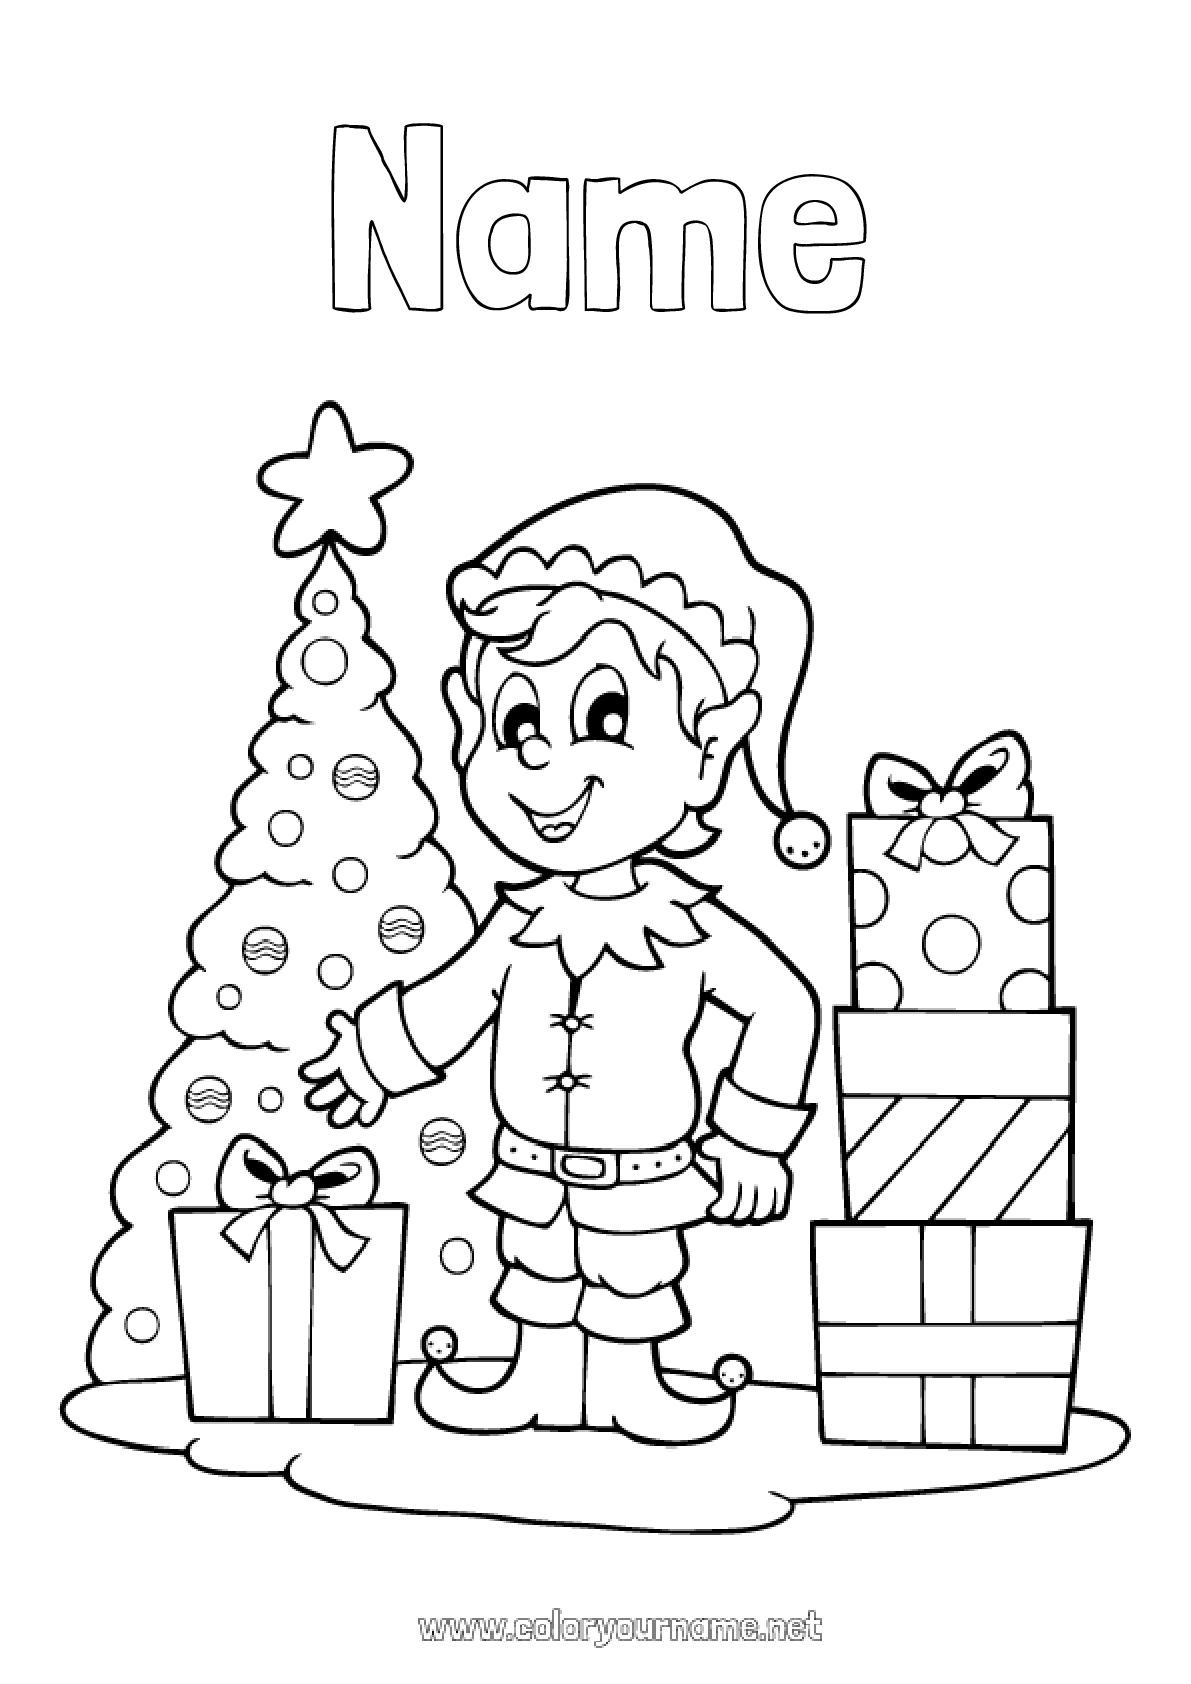 coloring pages of elf on a shelf